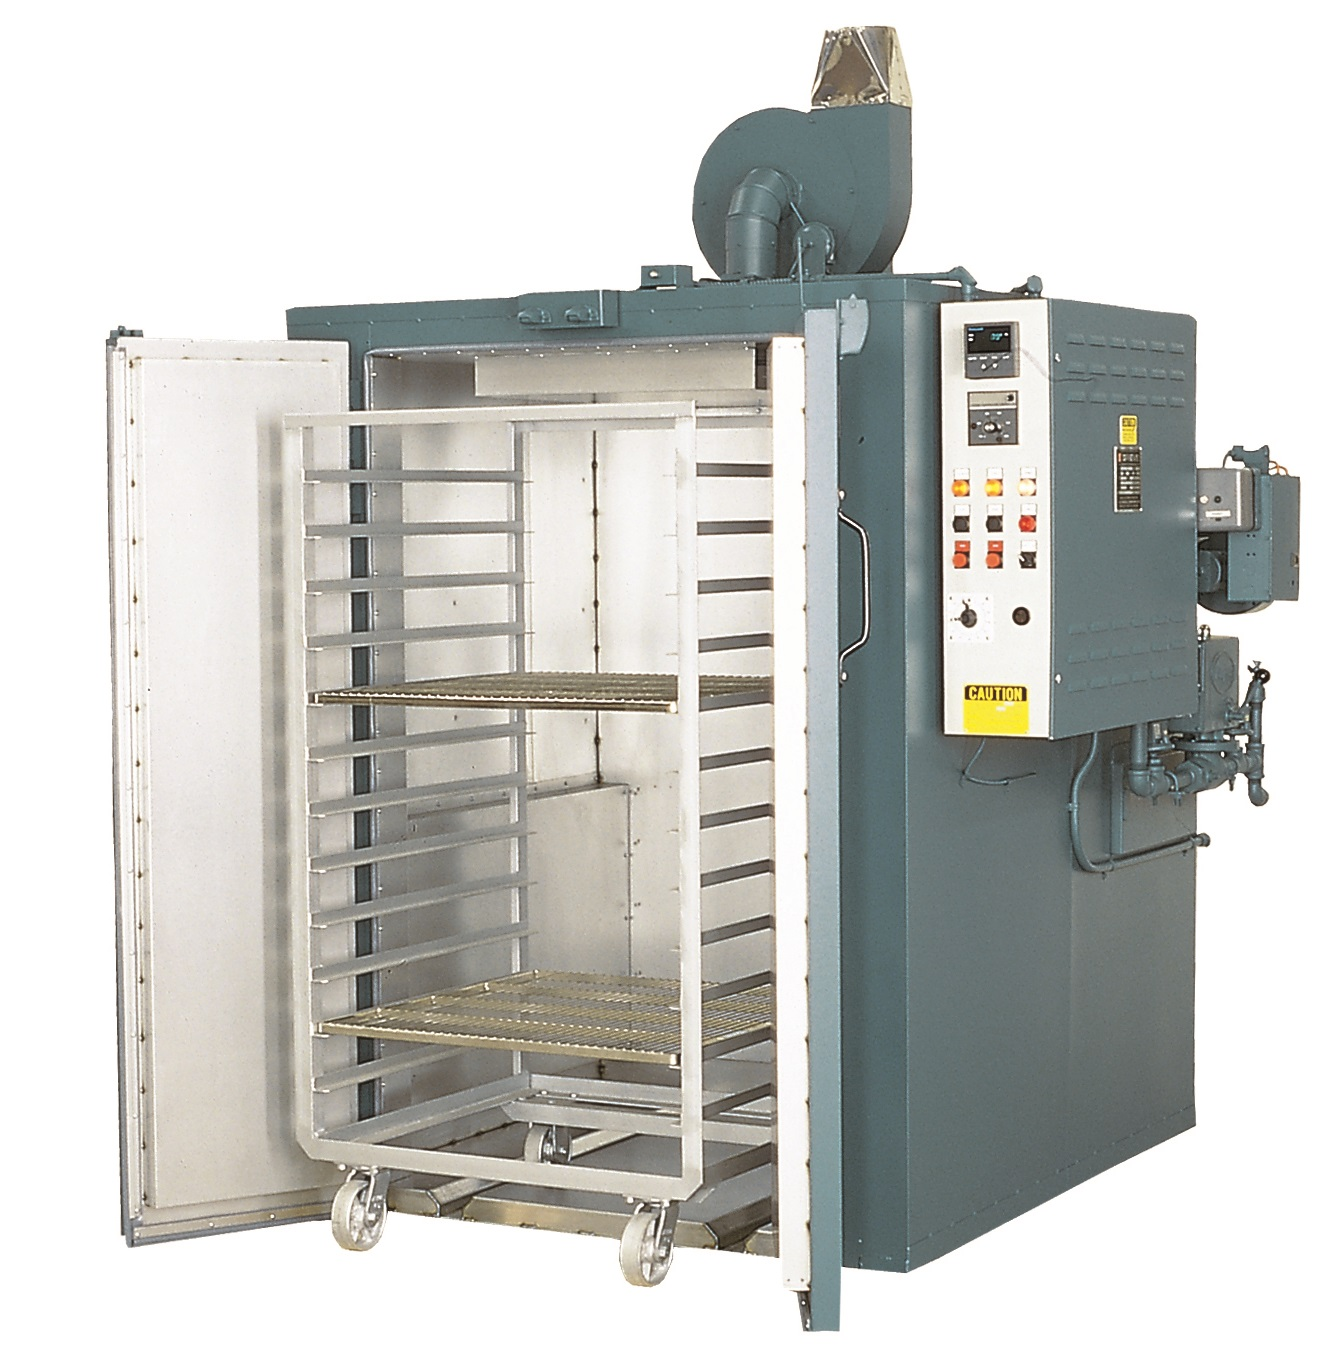 Industrial ovens and furnaces manufactured by Grieve Corporation, a leading manufacturer in the field